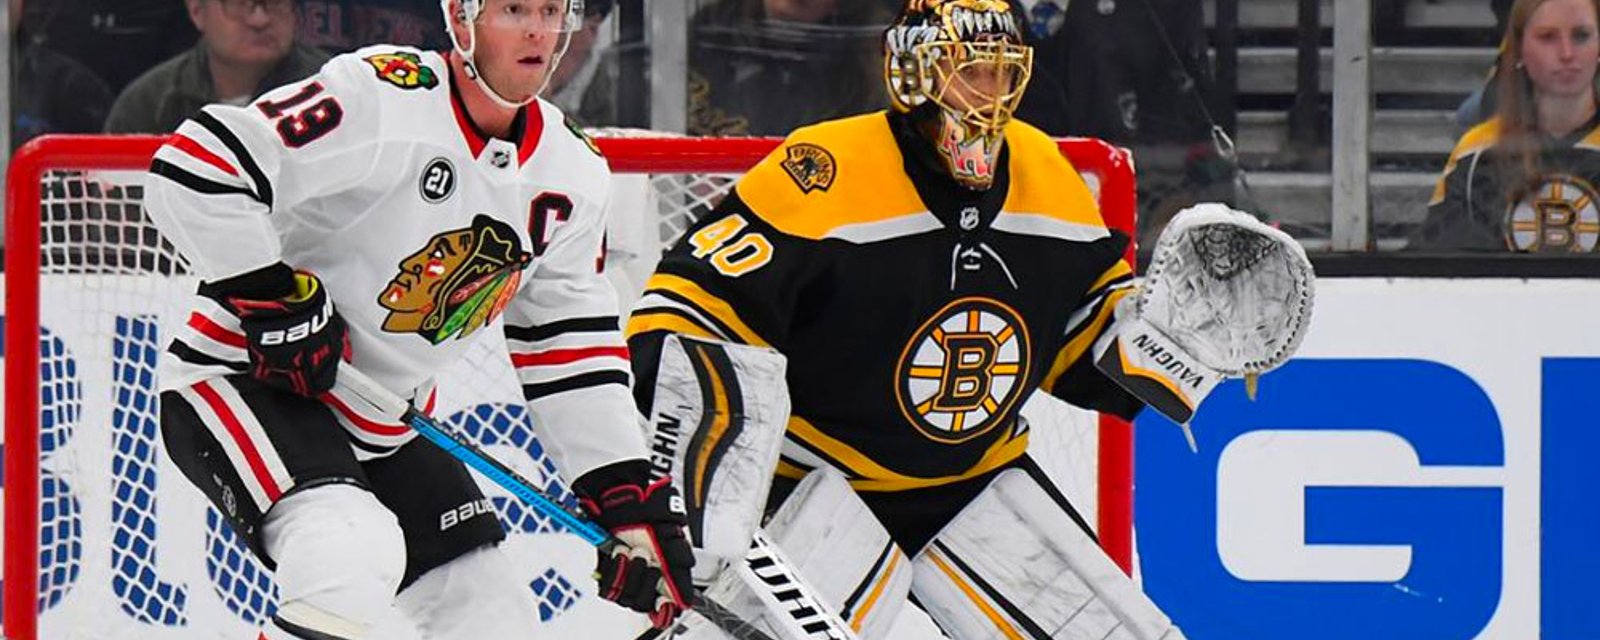 Preview: Moore to make season debut as Bruins shuffle lineup for game against Blackhawks 